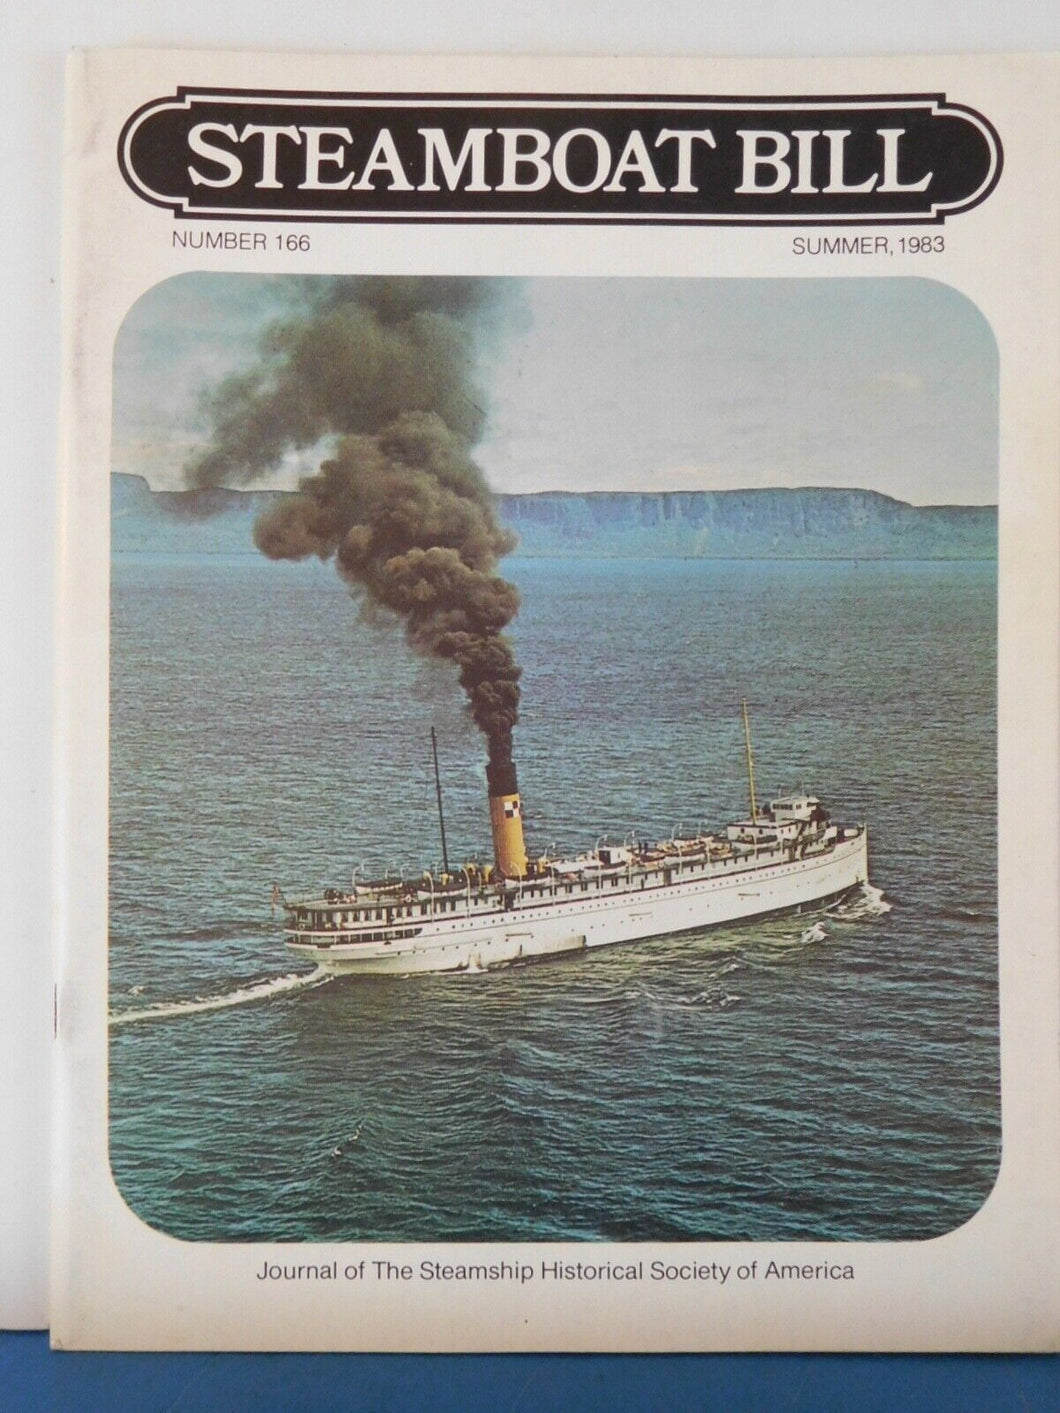 Steamboat Bill #166 Journal of the Steamship Historical Society